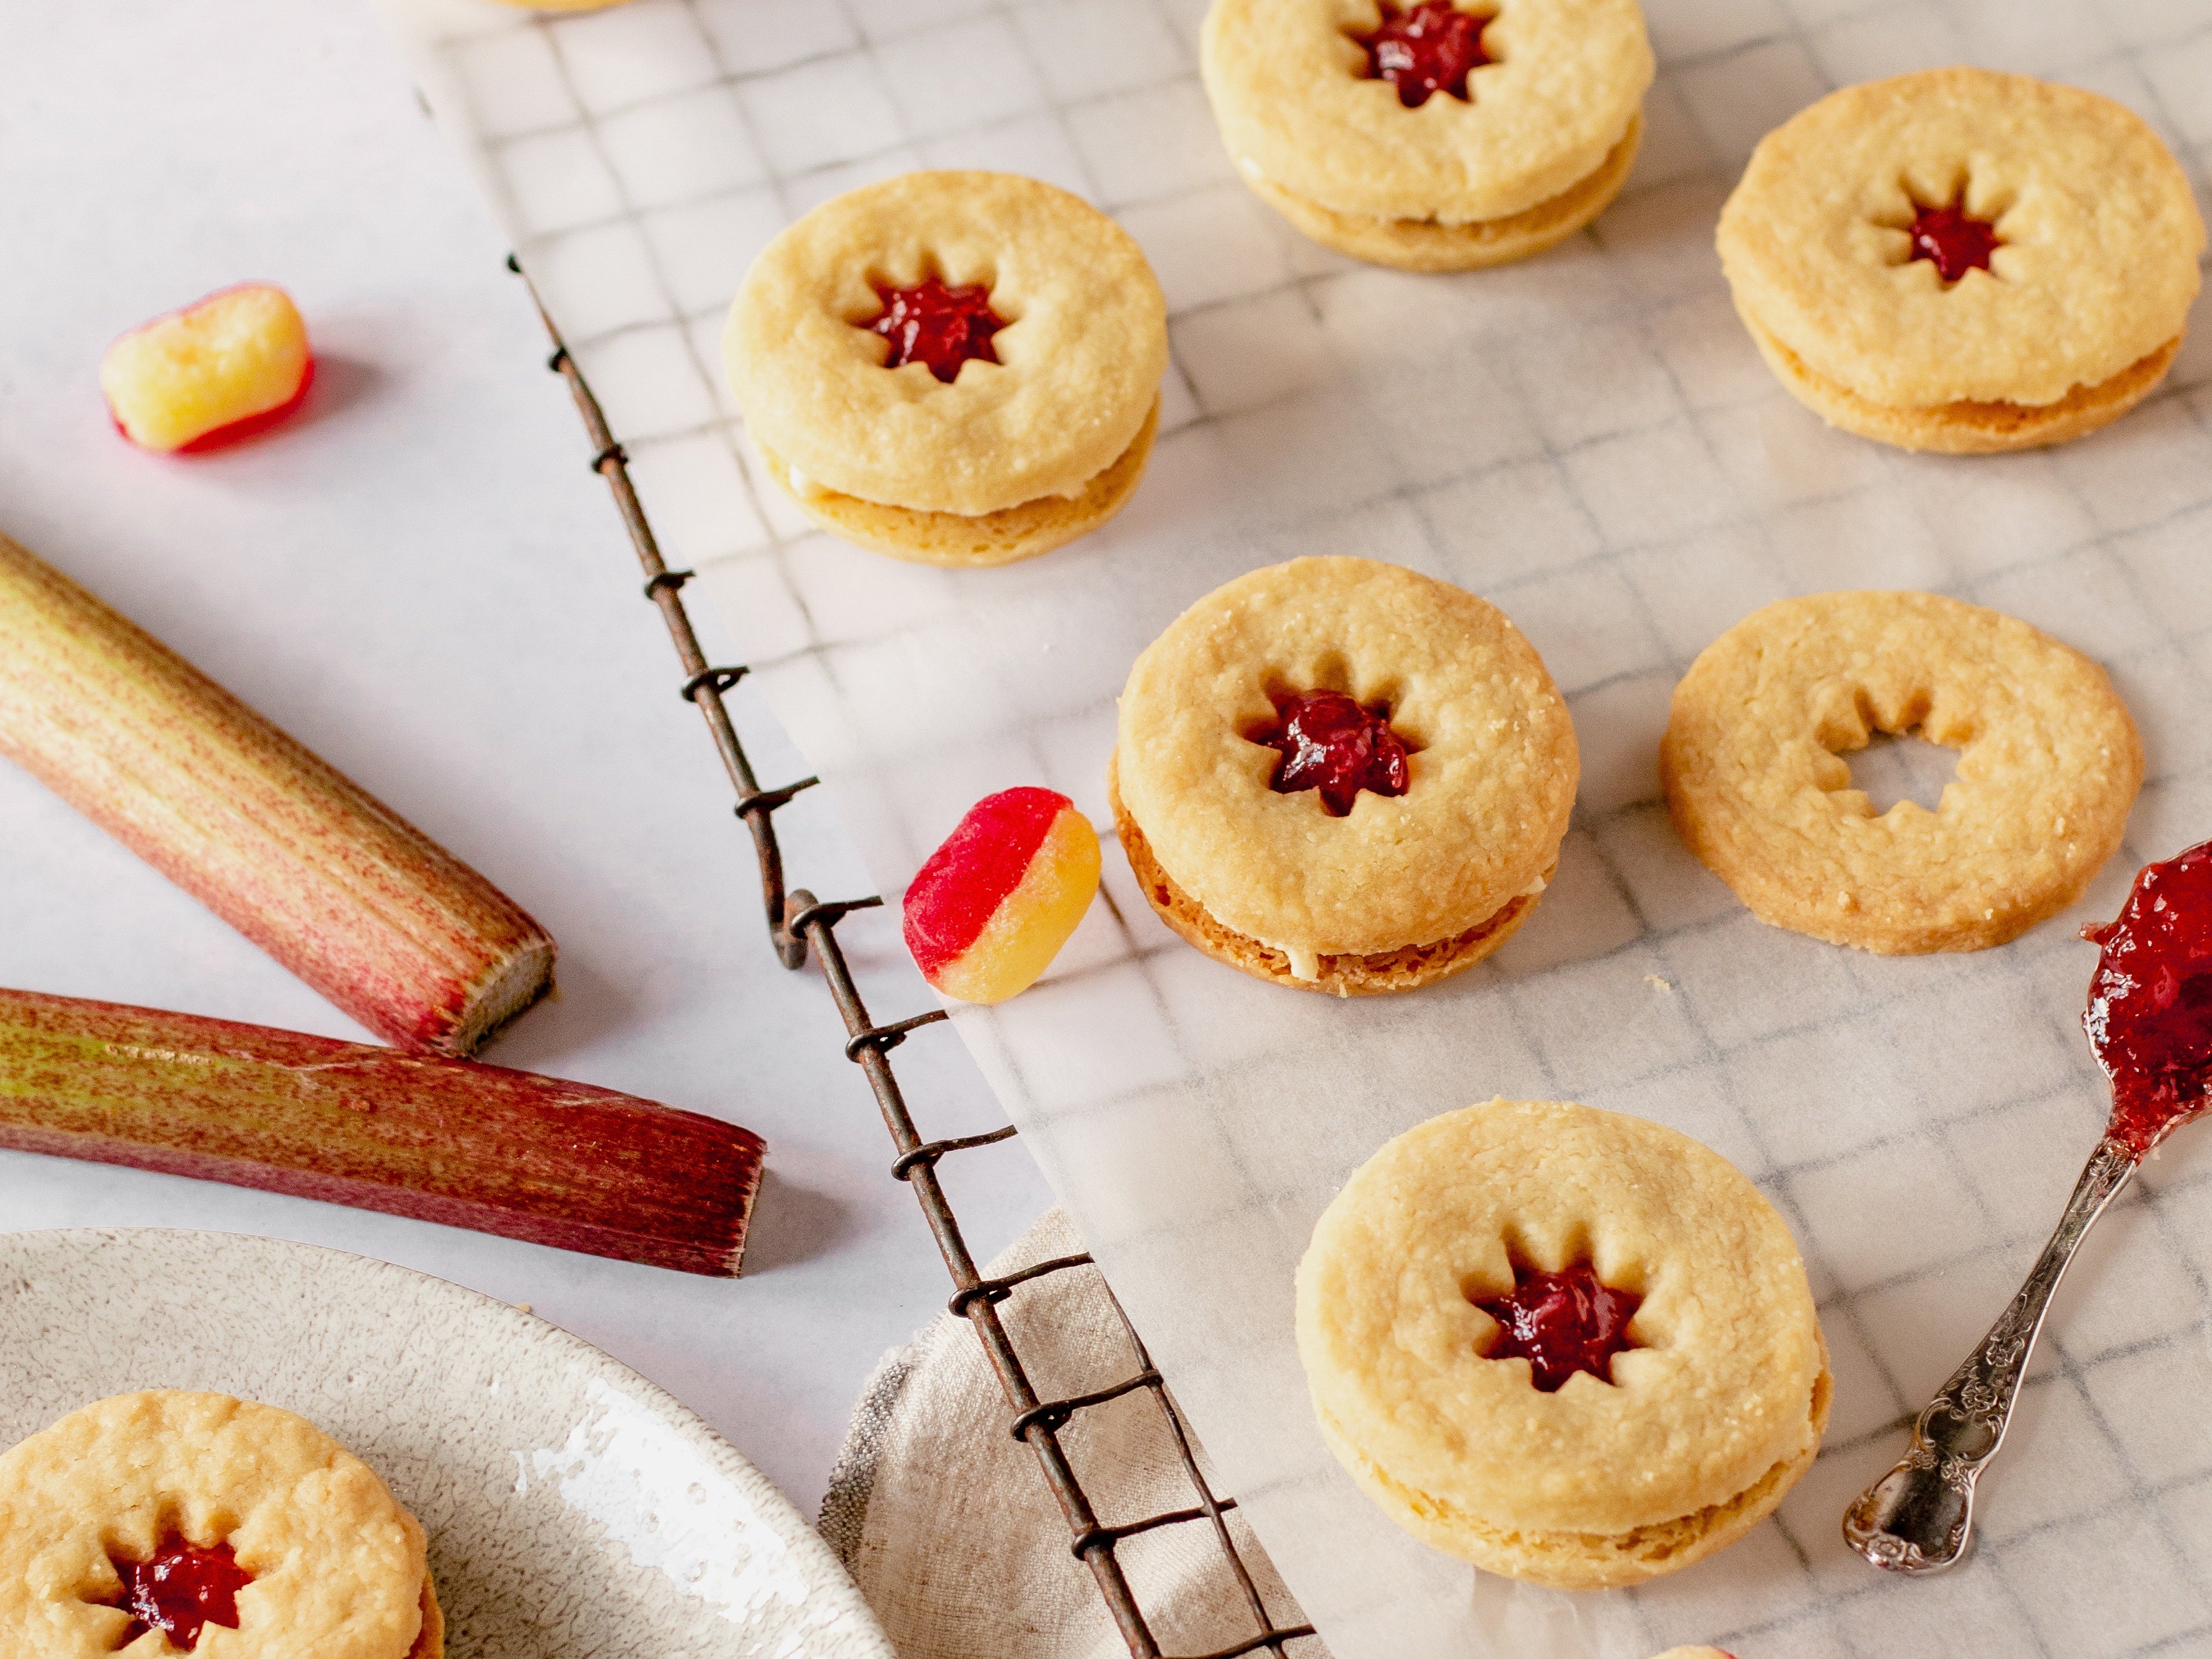 Jammy dodger biscuits on cooling rack with sweets, rhubarb sticks and jammy spoon